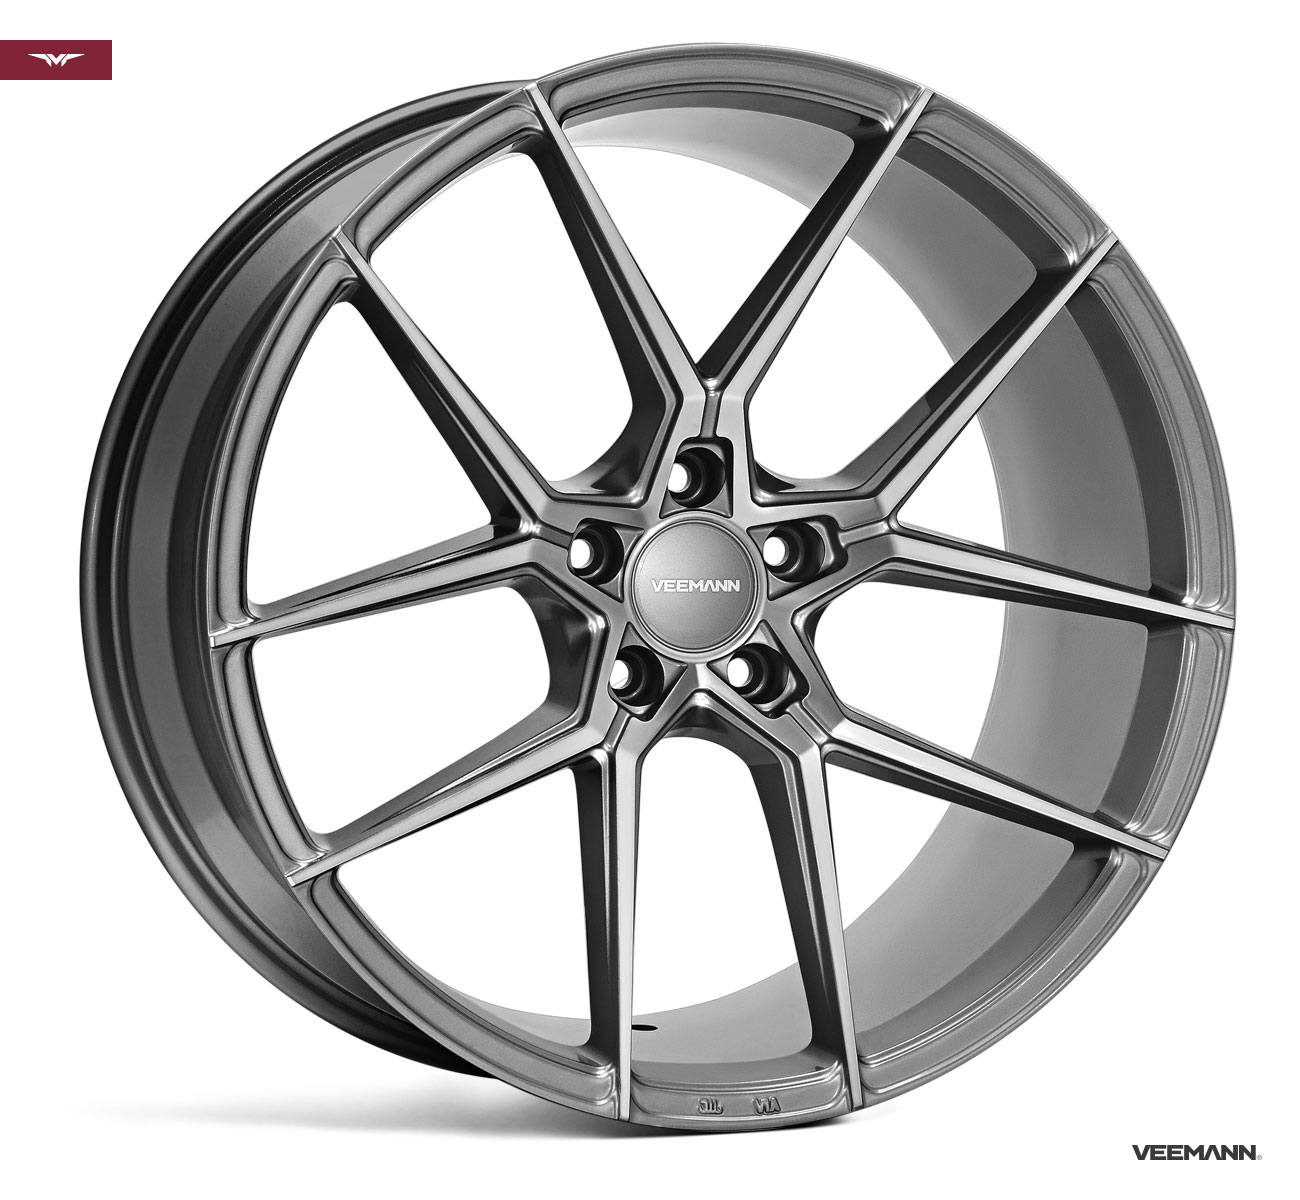 NEW 20" VEEMANN V-FS39 ALLOY WHEELS IN GLOSS GRAPHITE WITH WIDER 10" REAR